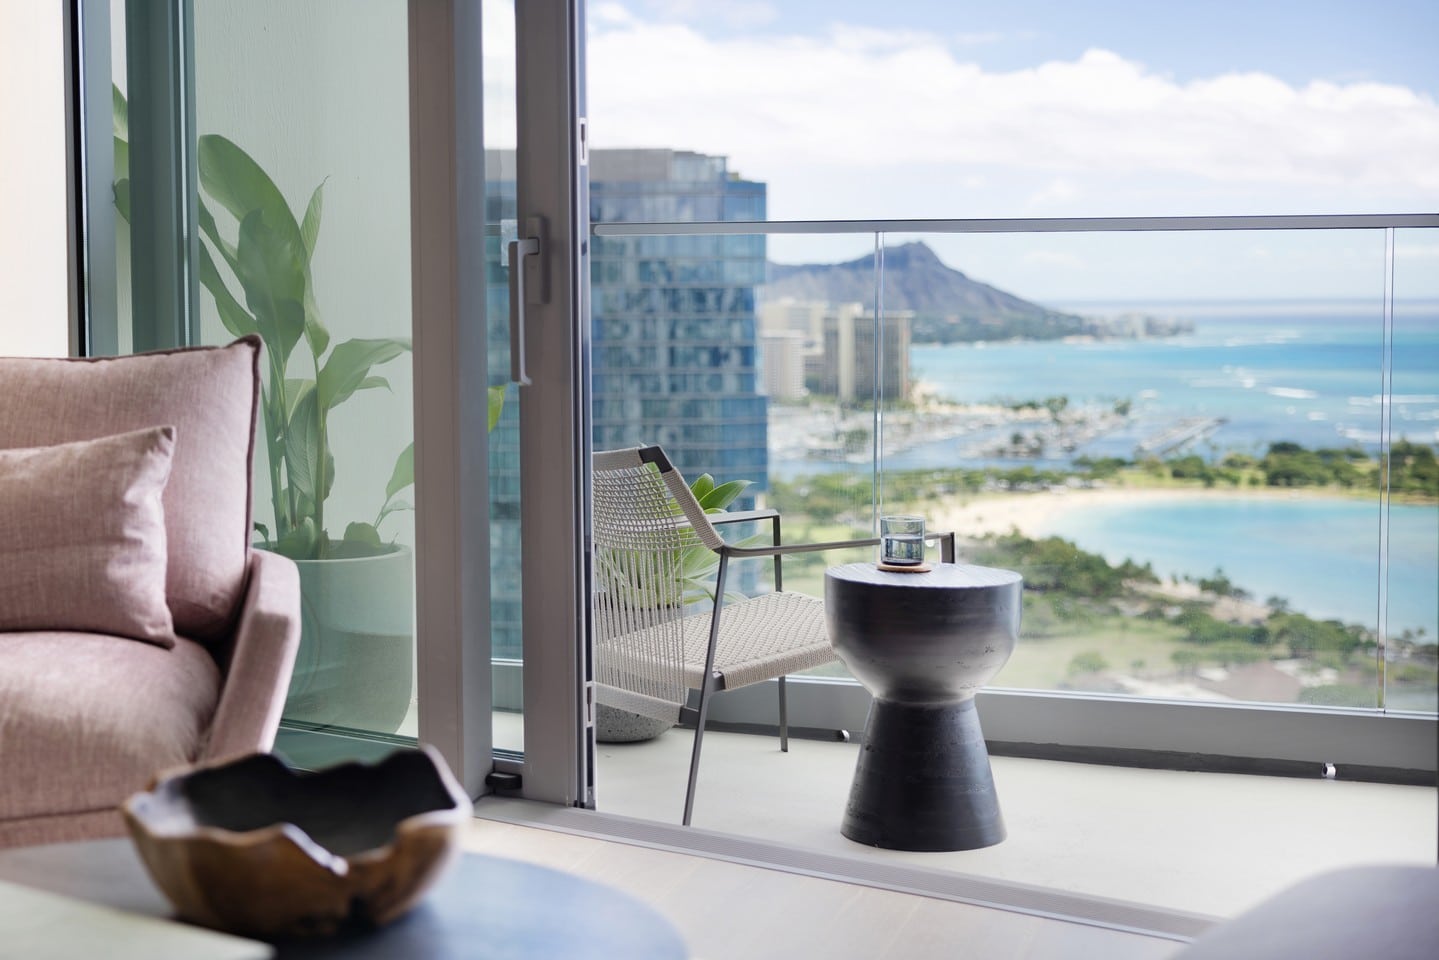 At Kōʻula, living areas feature floor-to-ceiling windows that artfully frame Hawaiʻi’s picturesque surroundings. Learn more about the newly opened Kōʻula  residences at the link in our bio.